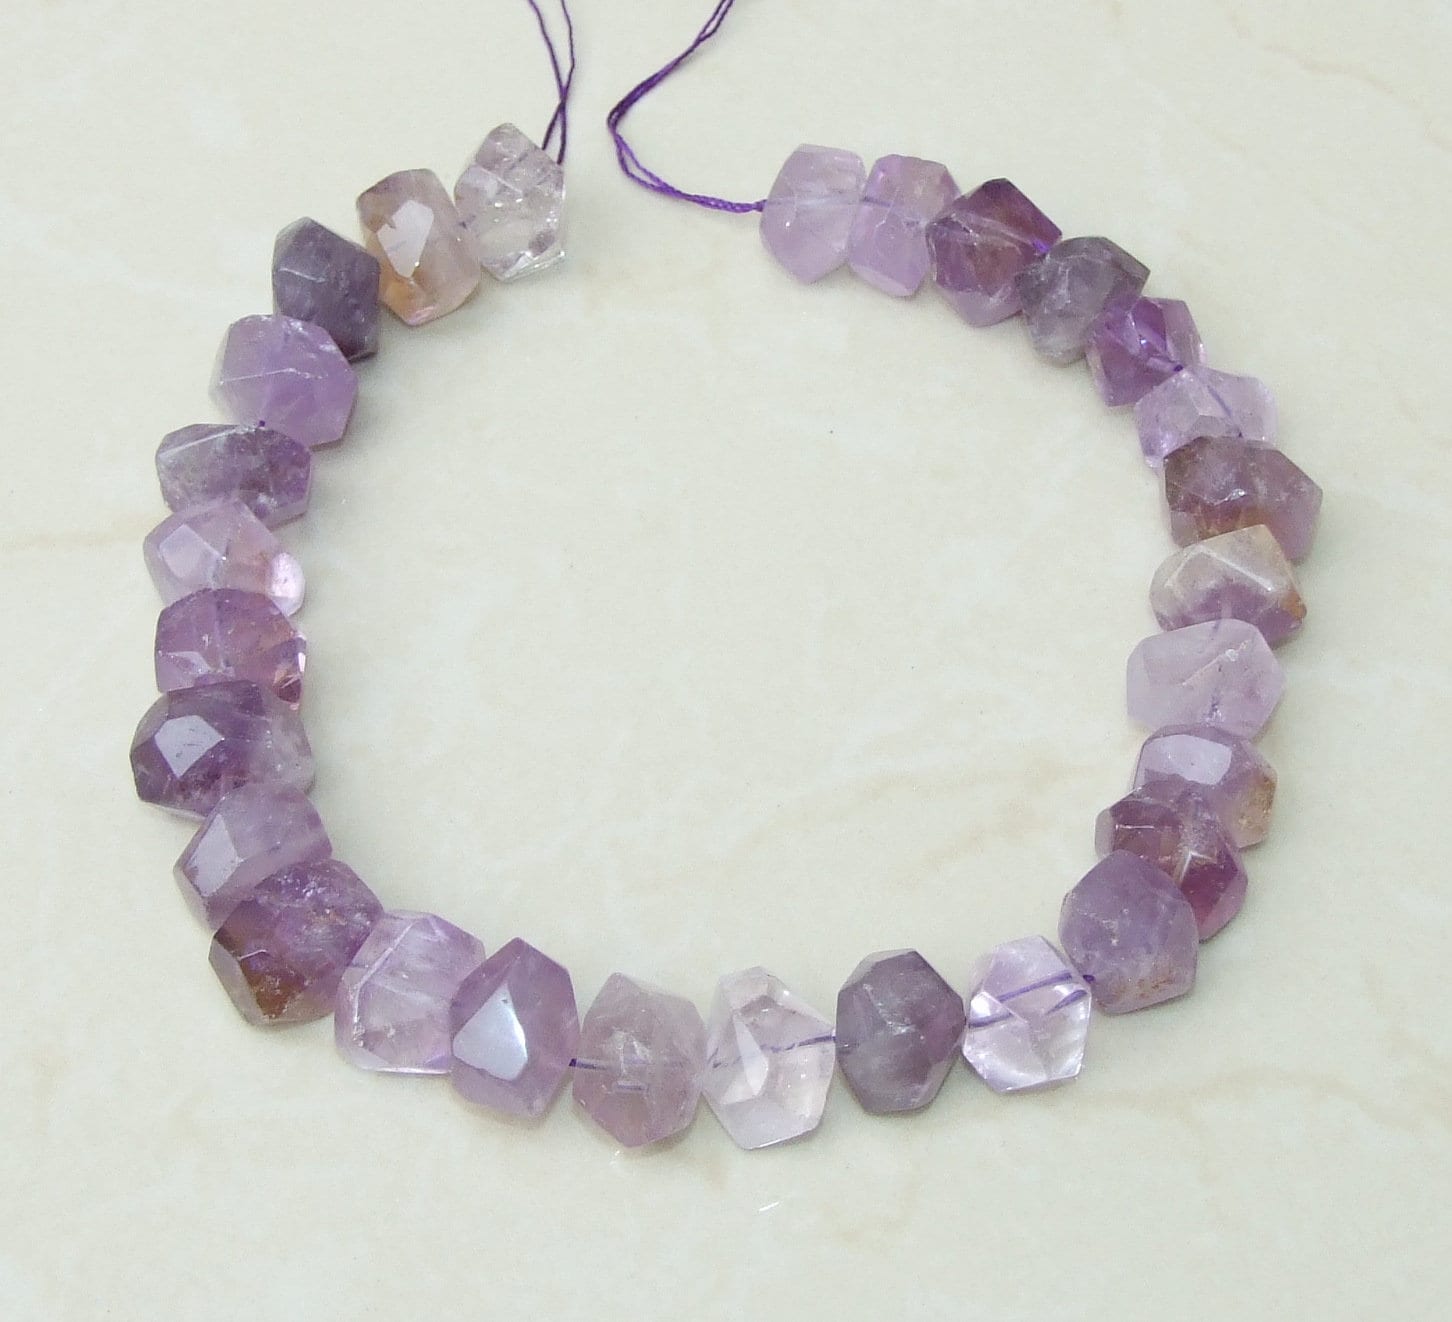 Light Amethyst Faceted Nugget, Polished Amethyst Beads, Gemstone Beads, Jewelry Stones, Amethyst Nuggets, Half Strand - 14mm x 14mm x 20mm